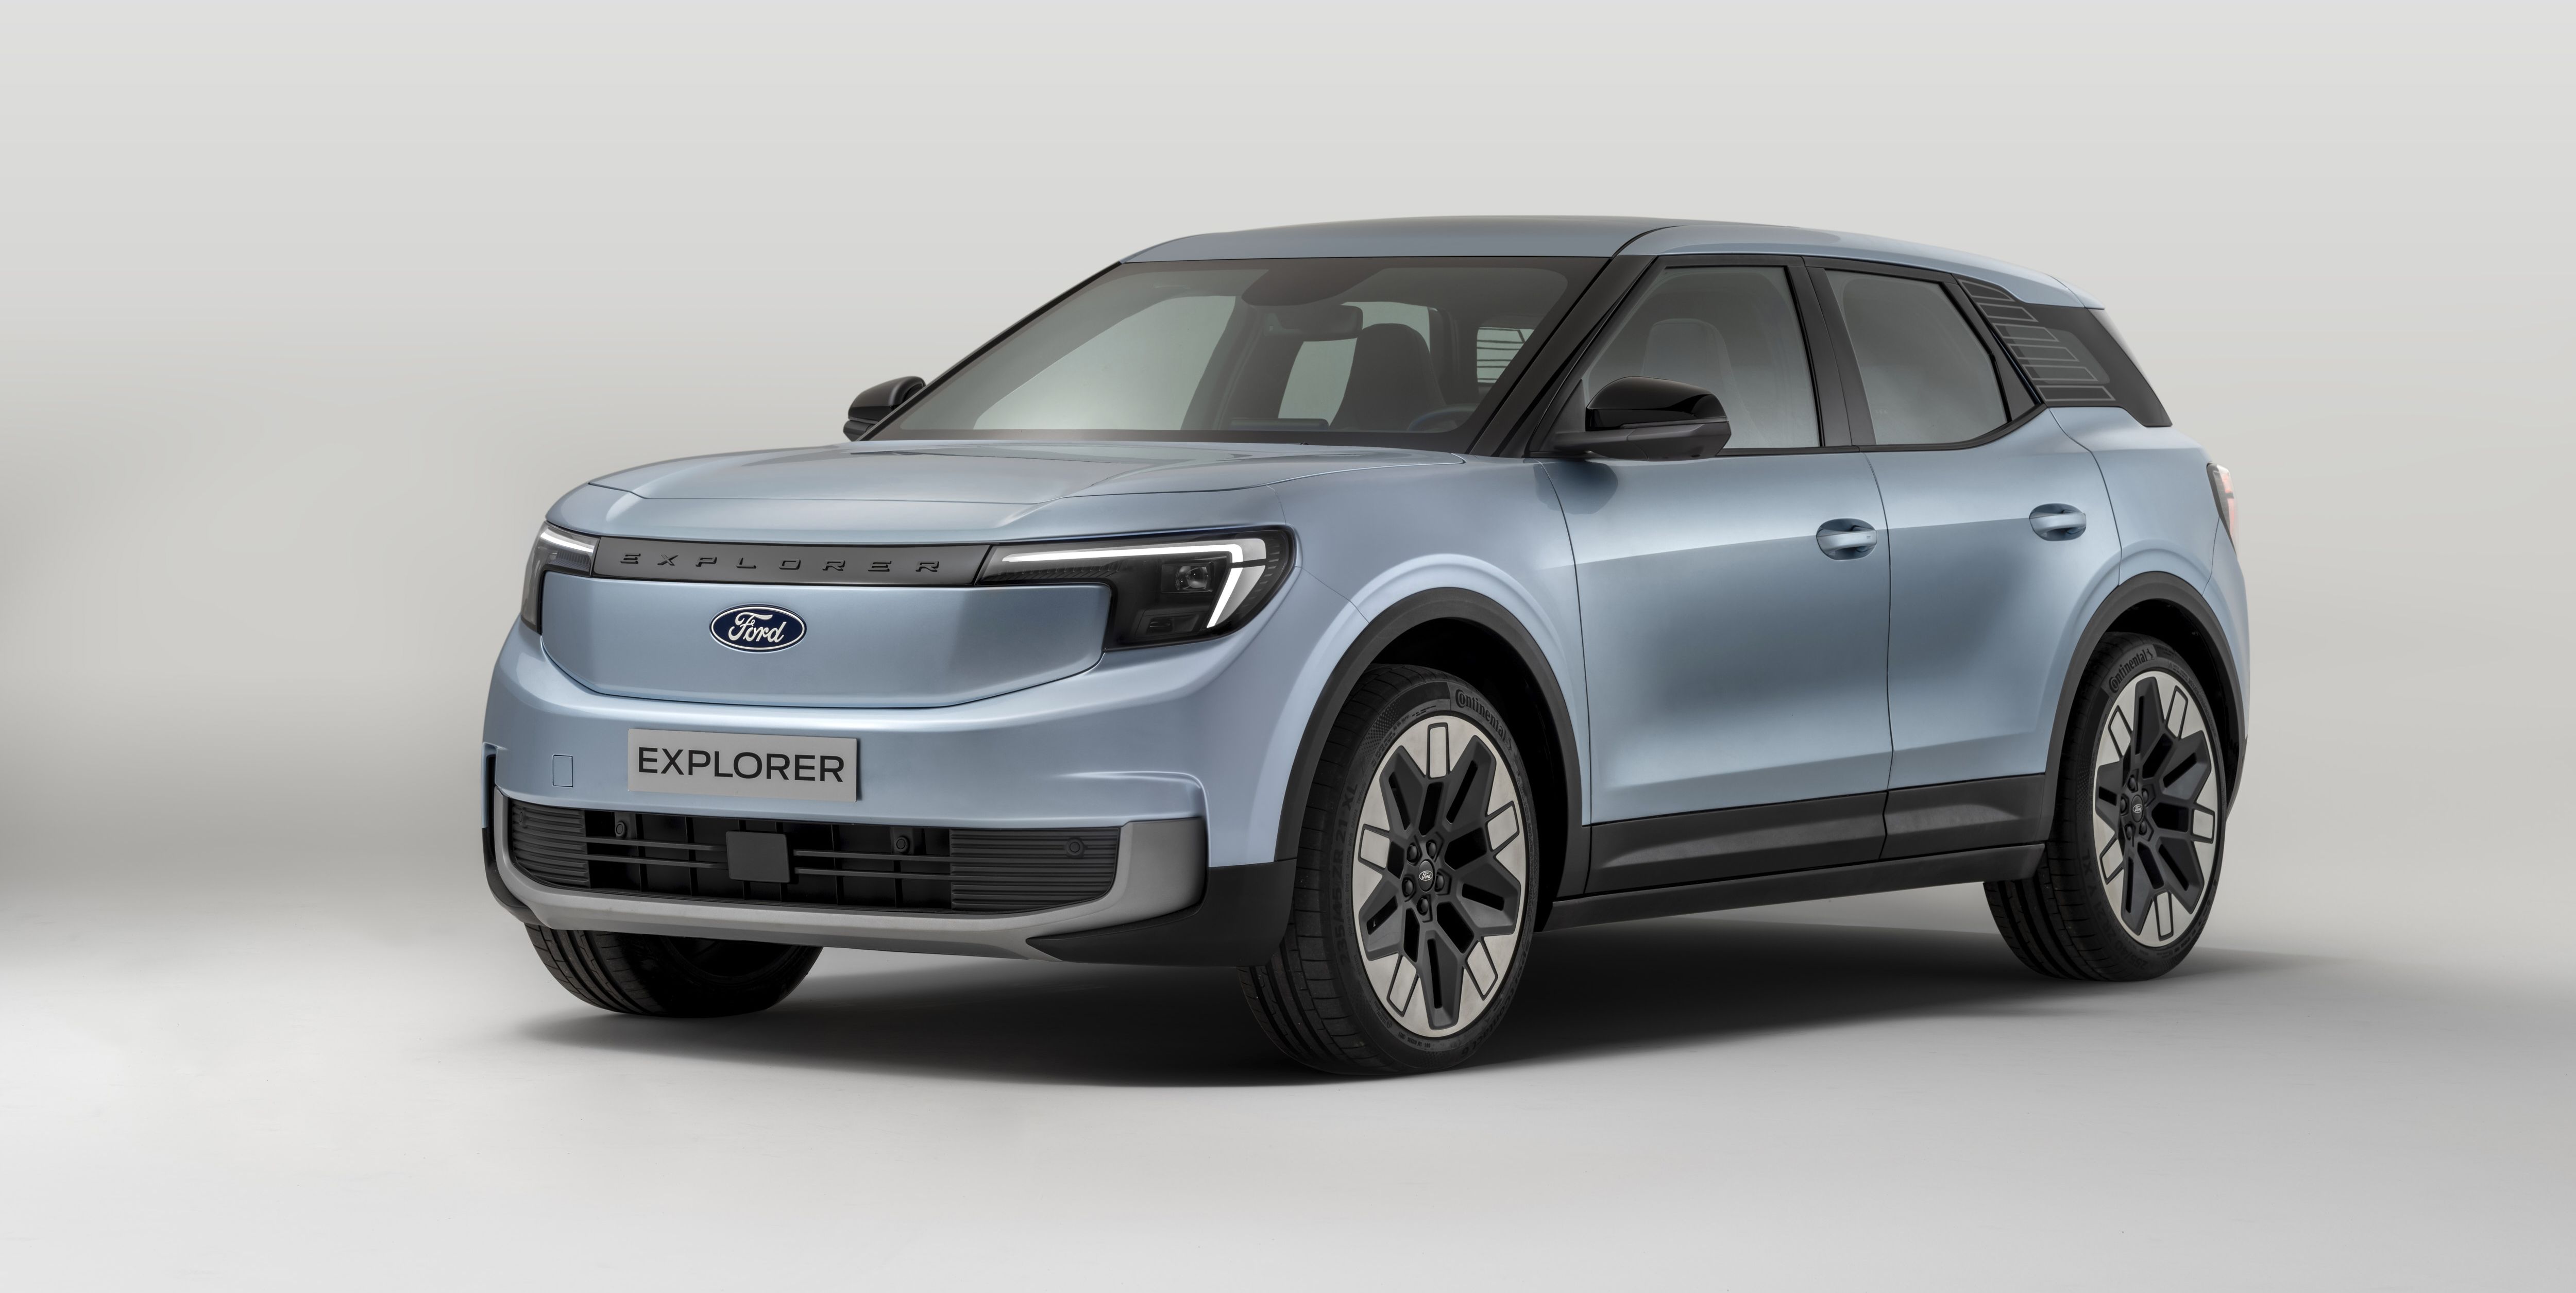 The All-Electric 2023 Ford Explorer Is a Small Crossover EV Built for Europe